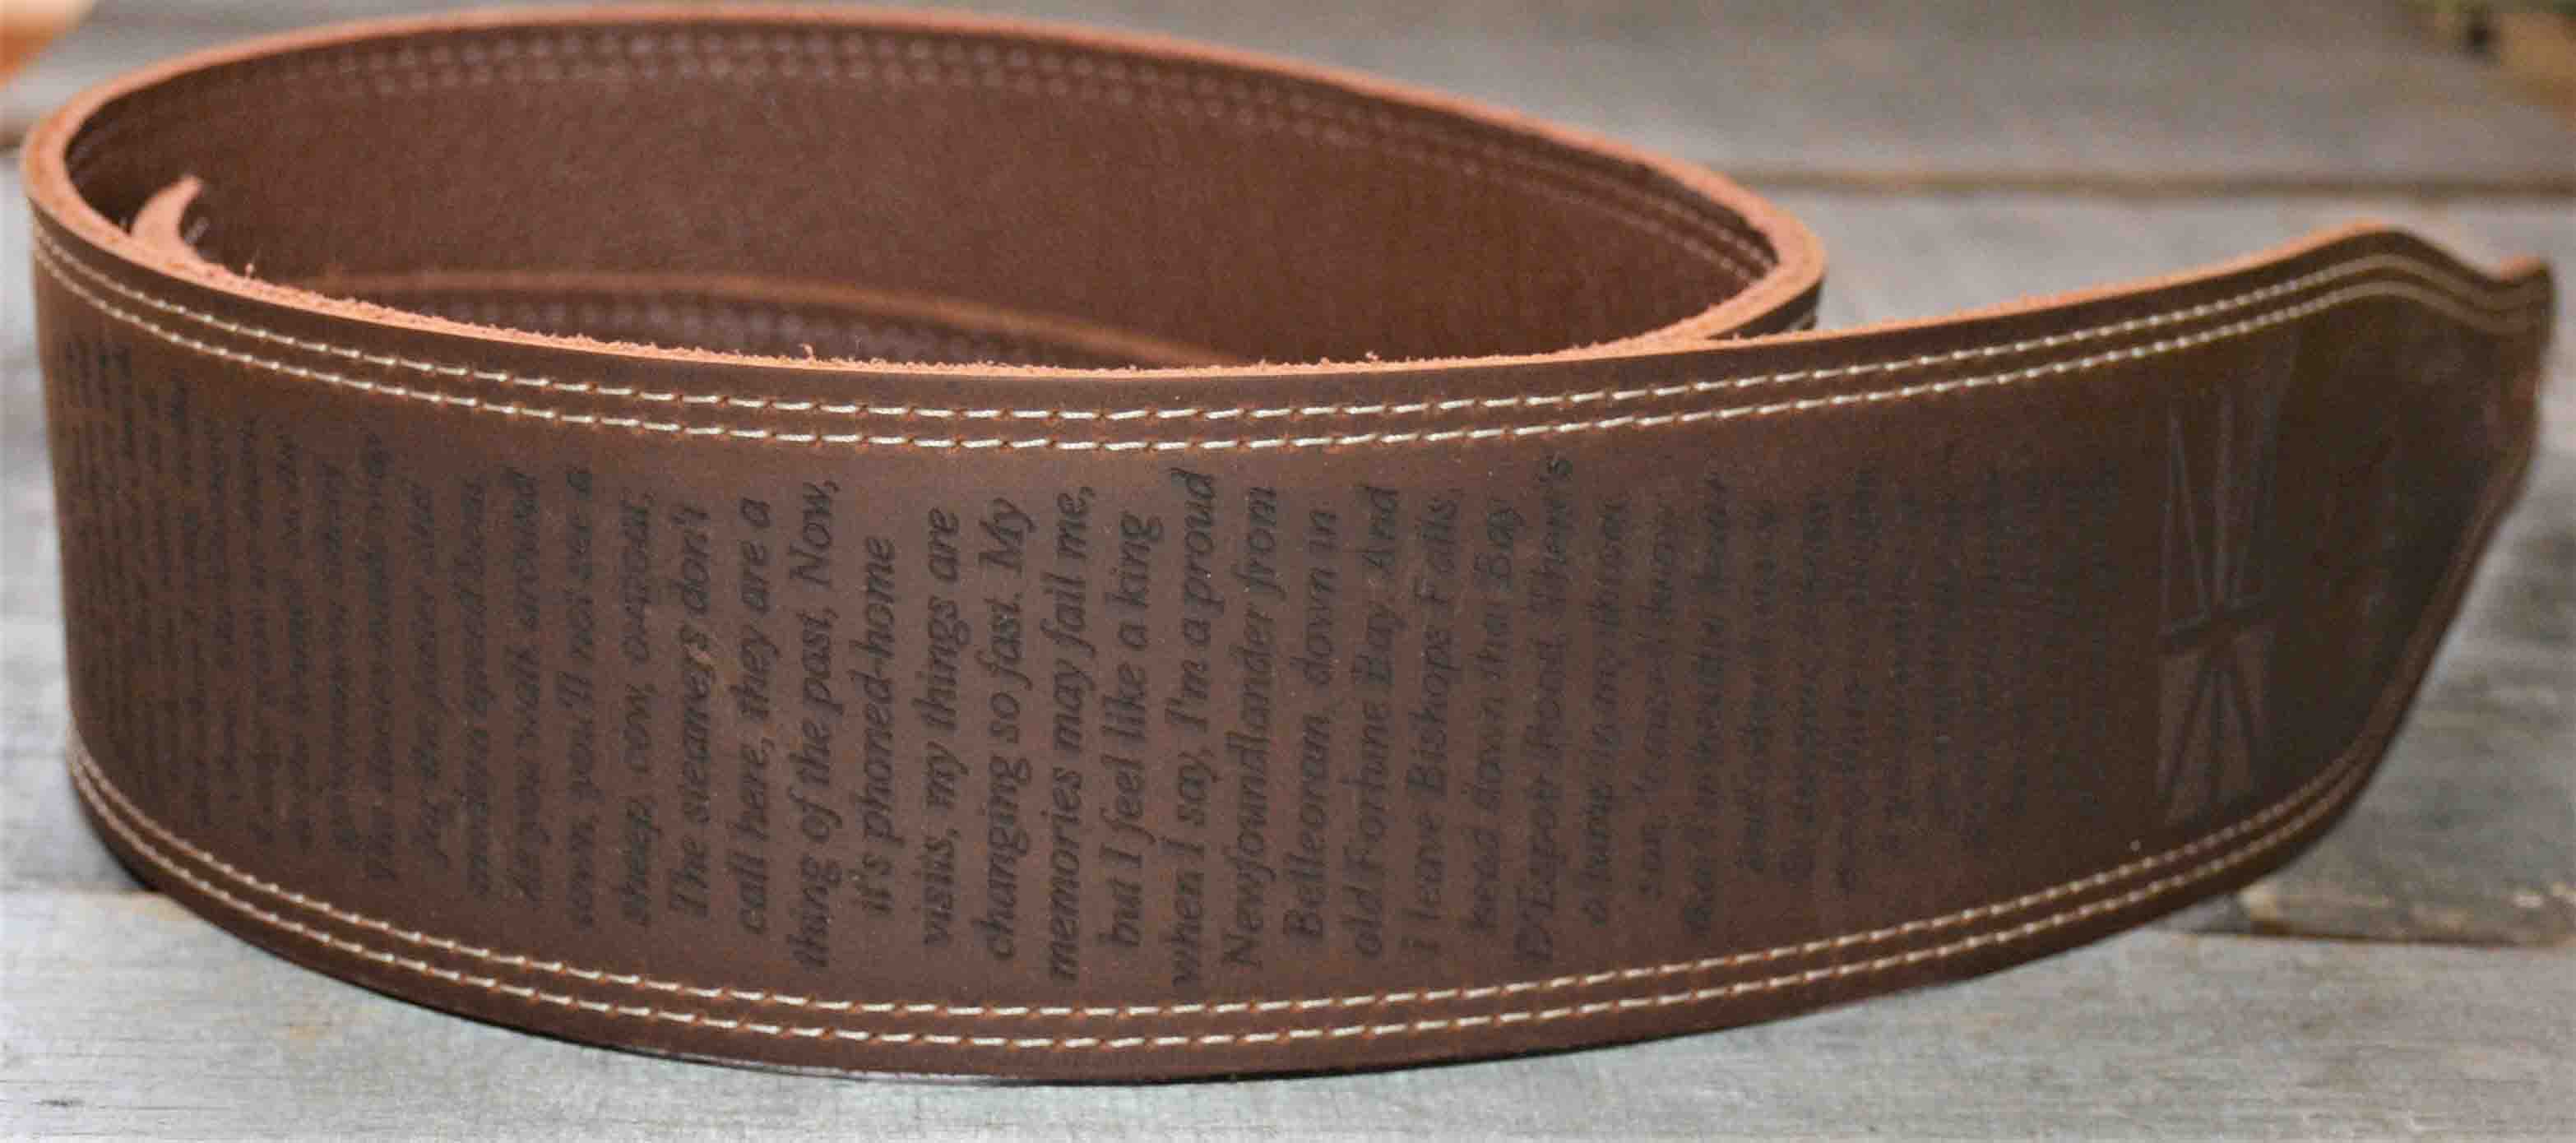 Double Stitch Butter Leather Guitar Straps.